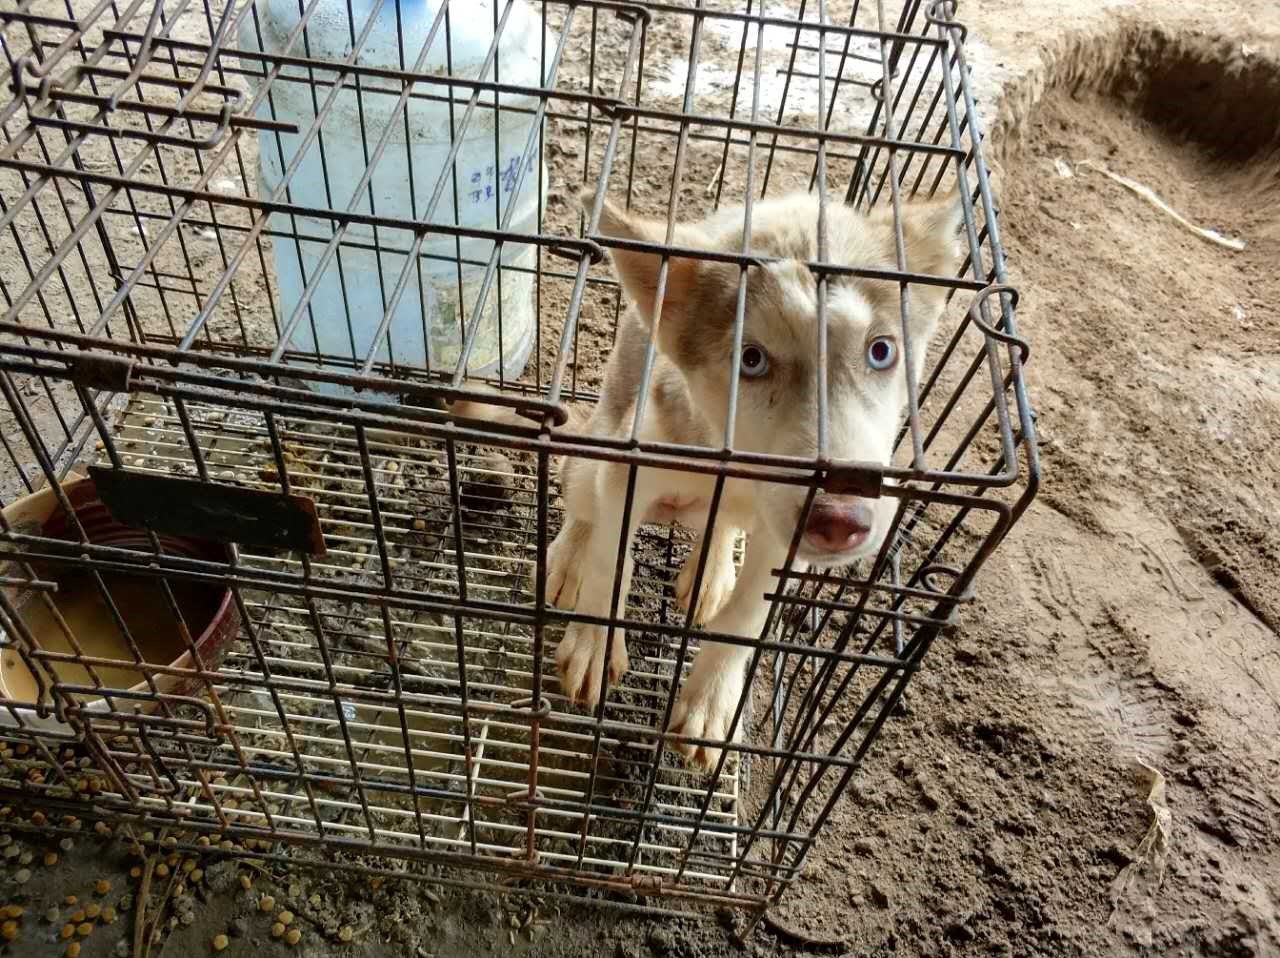 Dog rescued from the dog meat trade in China.